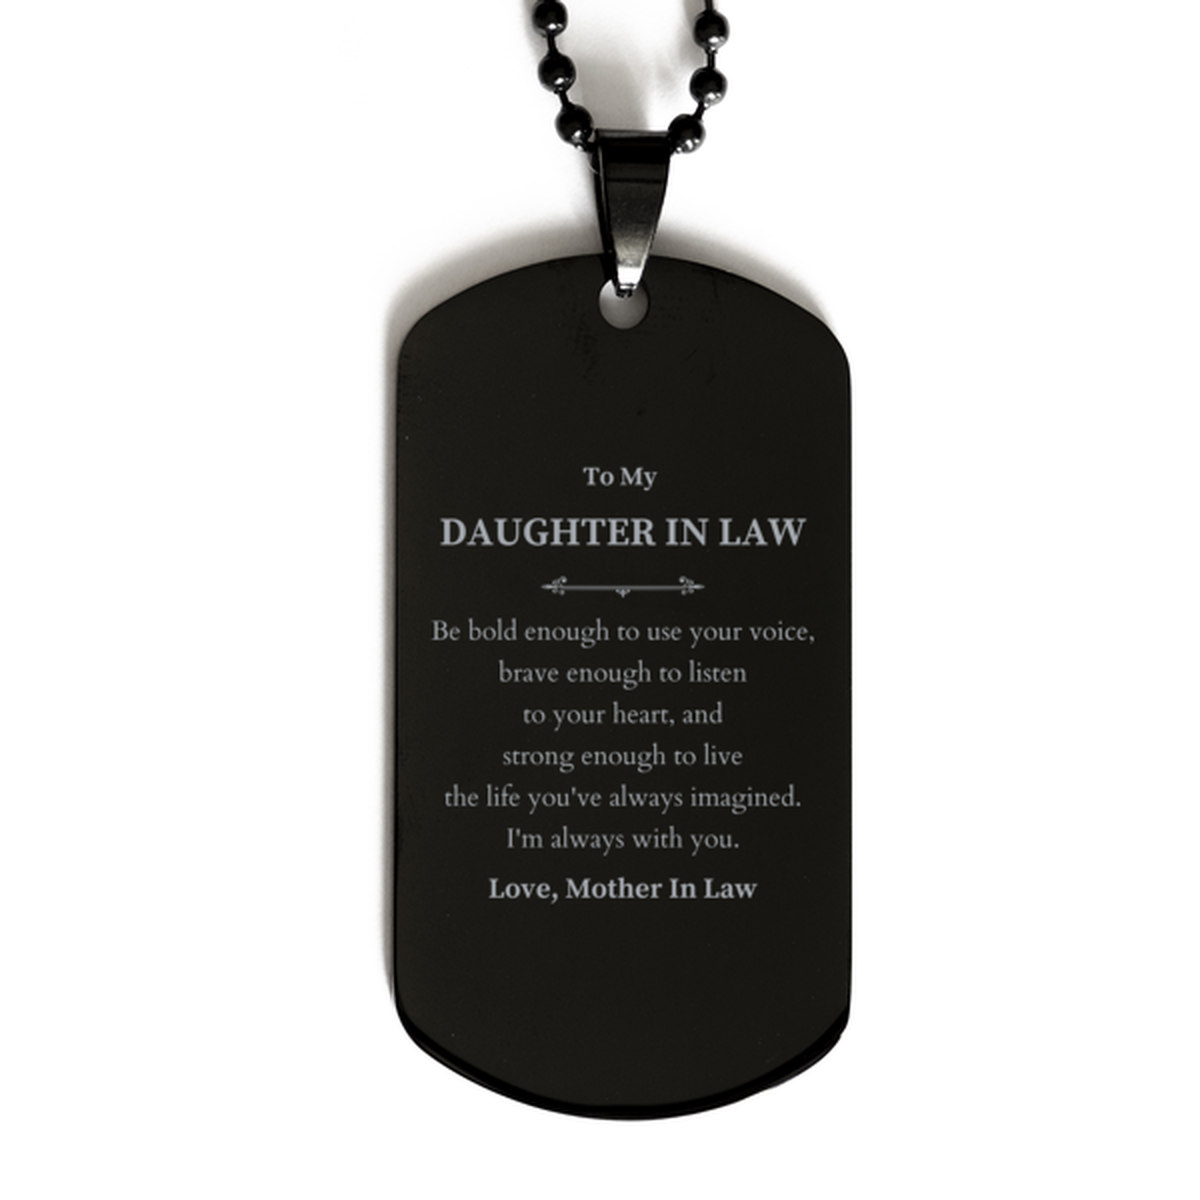 Keepsake Daughter In Law Black Dog Tag Gift Idea Graduation Christmas Birthday Daughter In Law from Mother In Law, Daughter In Law Be bold enough to use your voice, brave enough to listen to your heart. Love, Mother In Law